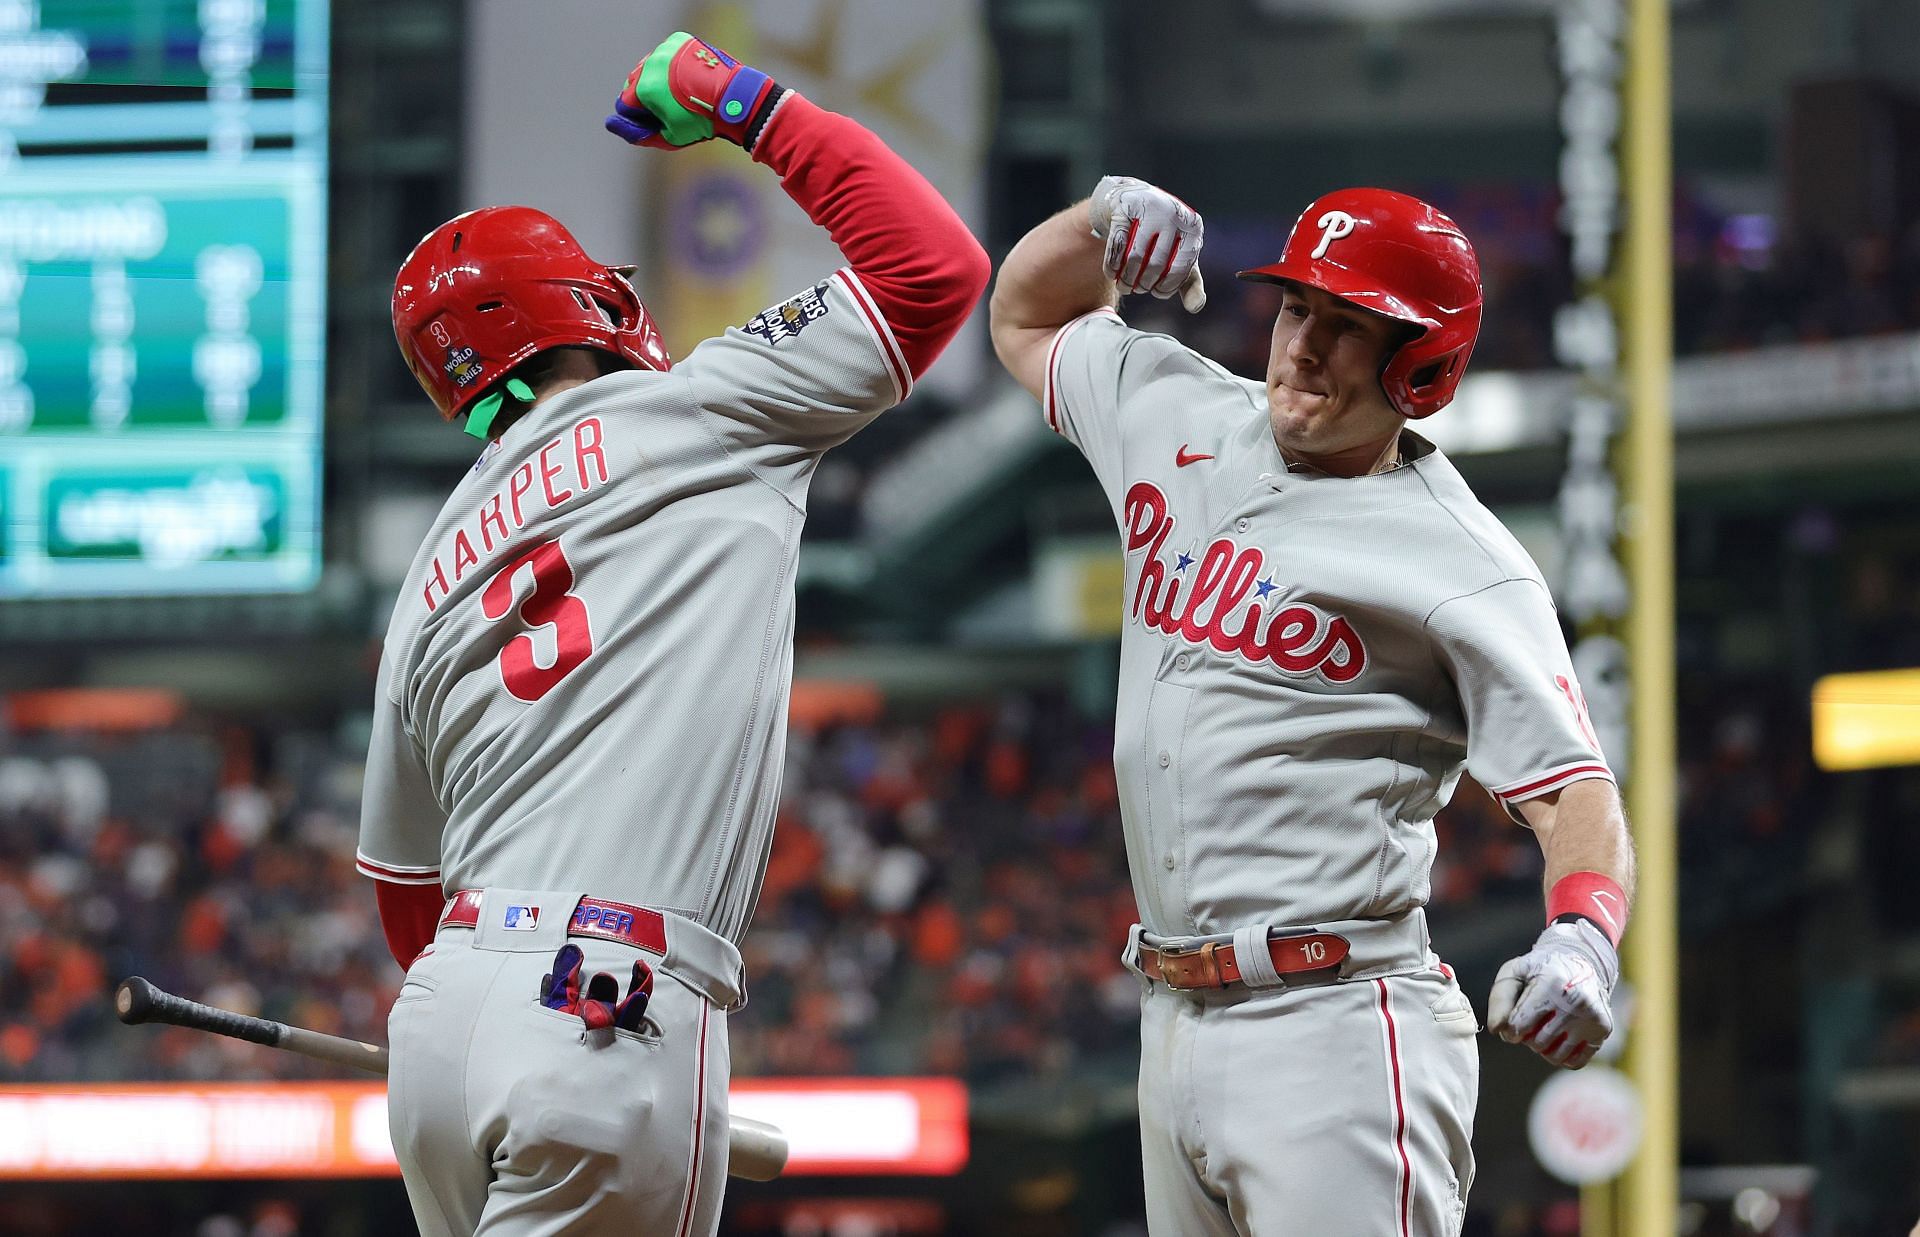 Bryce Harper and J.T. Realmuto of the Philadelphia Phillies celebrate after a home run in the 2022 World Series